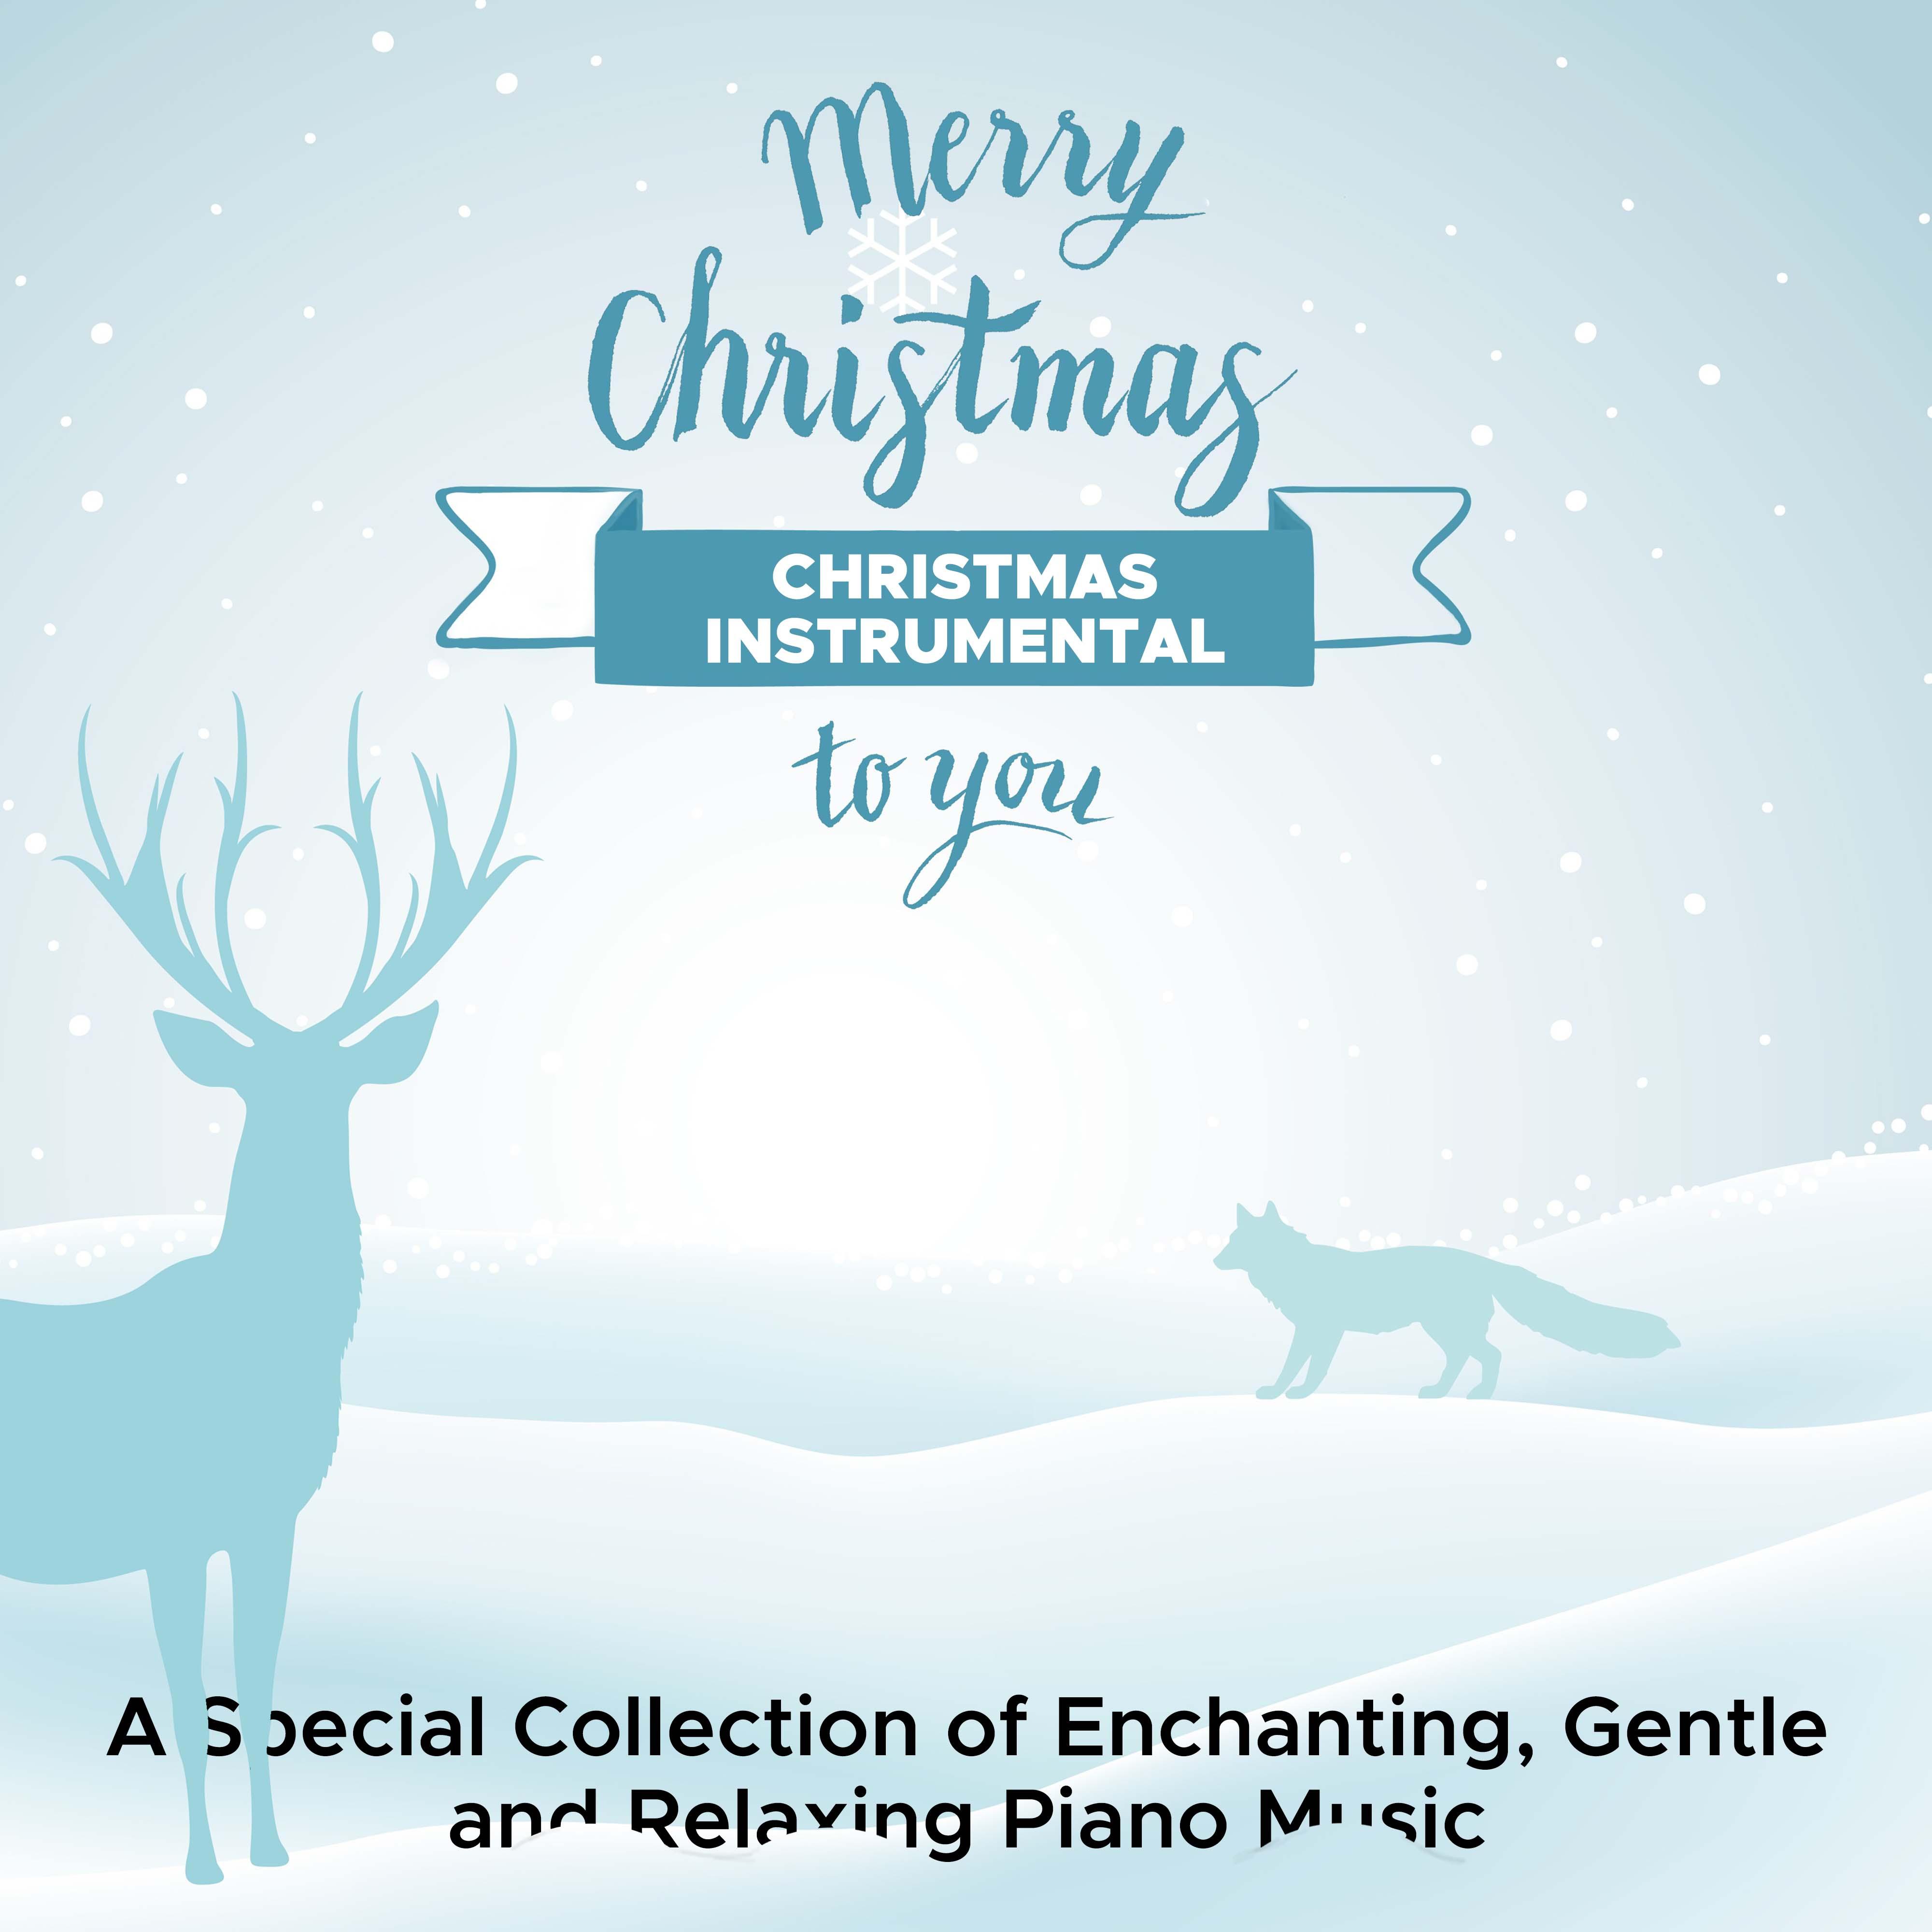 Christmas Instrumental - A Special Collection of Enchanting, Gentle and Relaxing Piano Music with New Age Songs